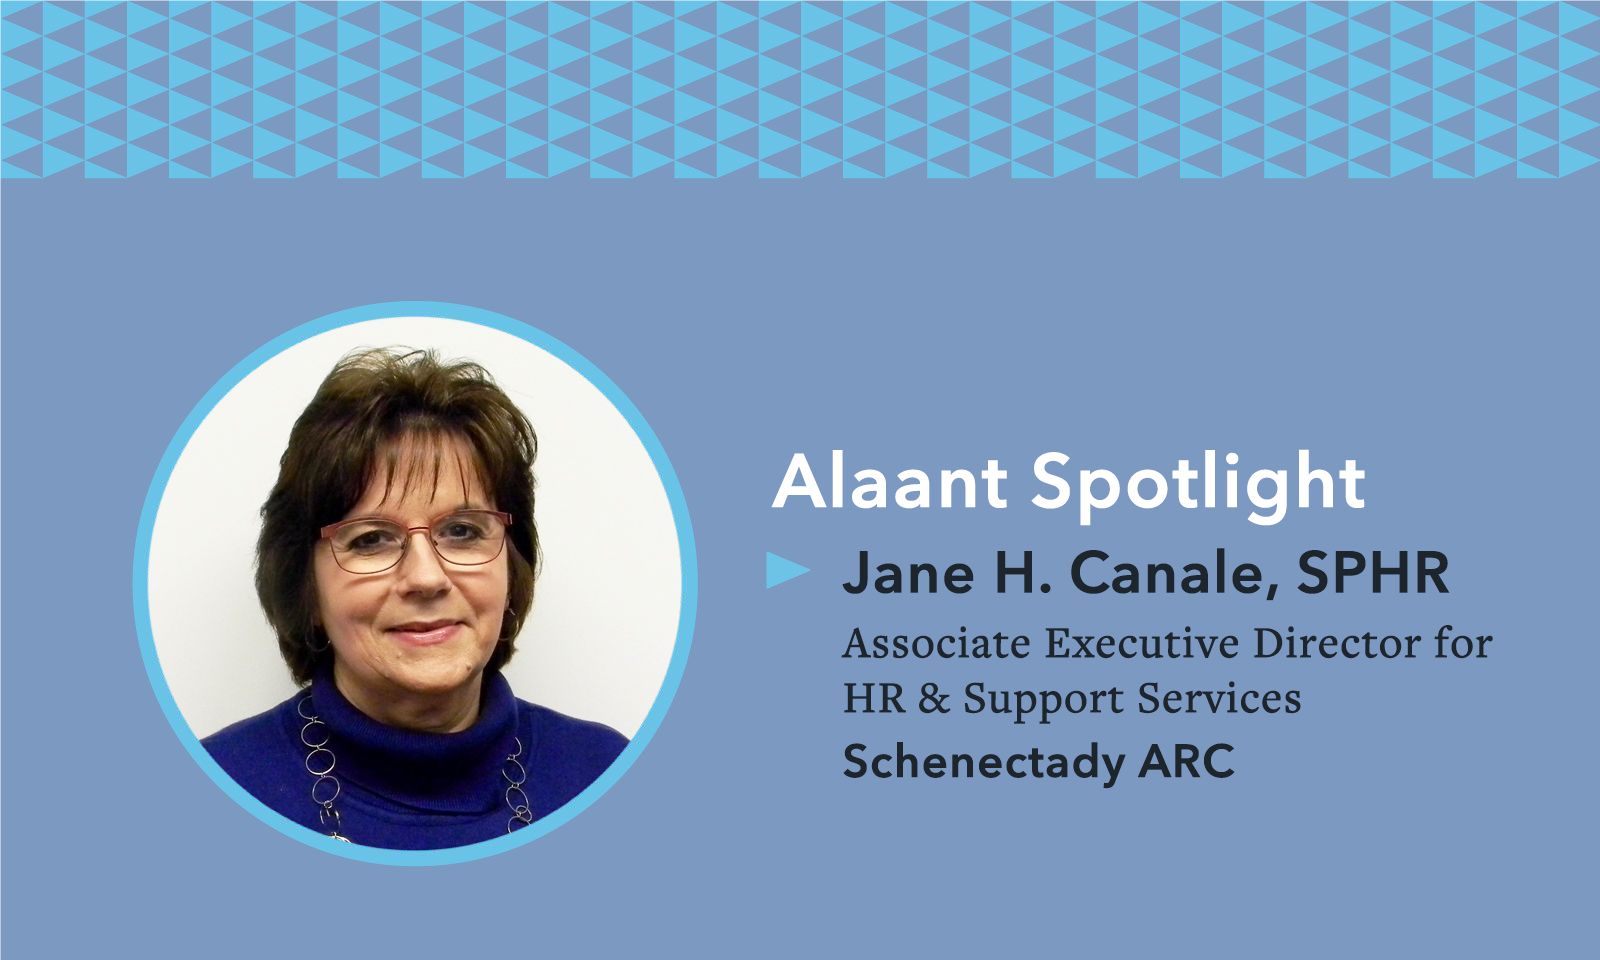 Alaant Spotlight Jane H. Canale, SPHR, Associate Executive Director for HR & Support Services, Schenectady ARC